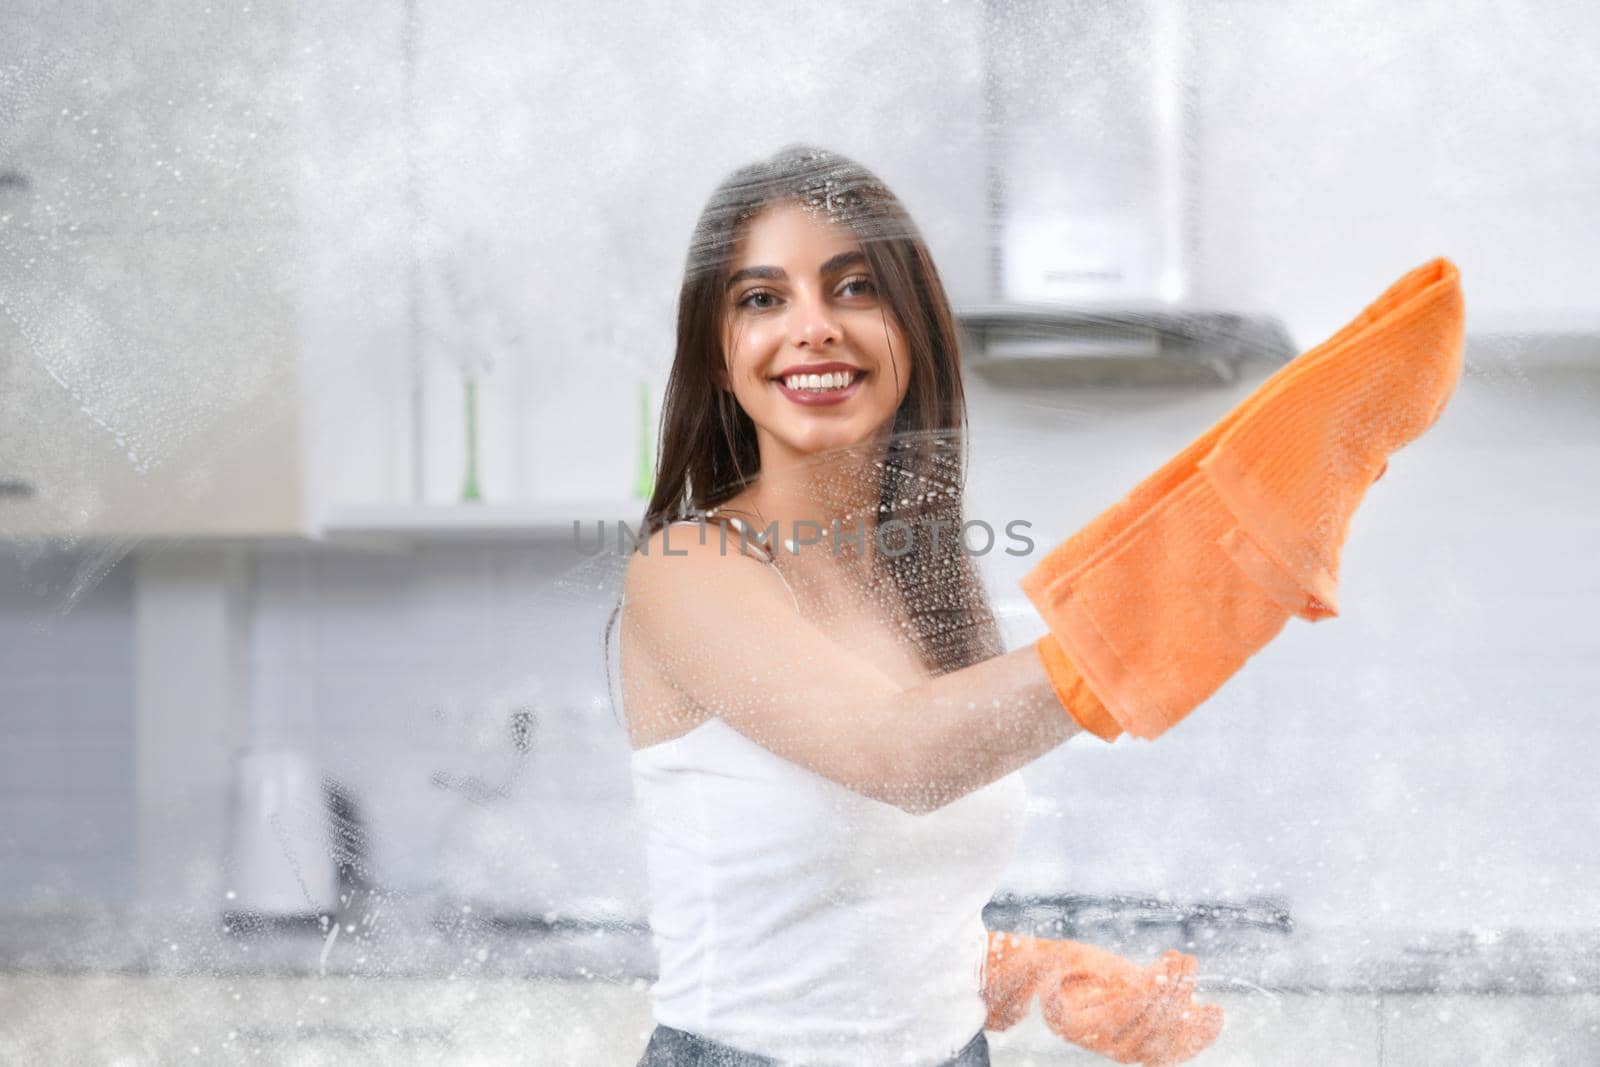 Close up of beautiful woman smiling and washing window with rag. Concept of house cleaning.